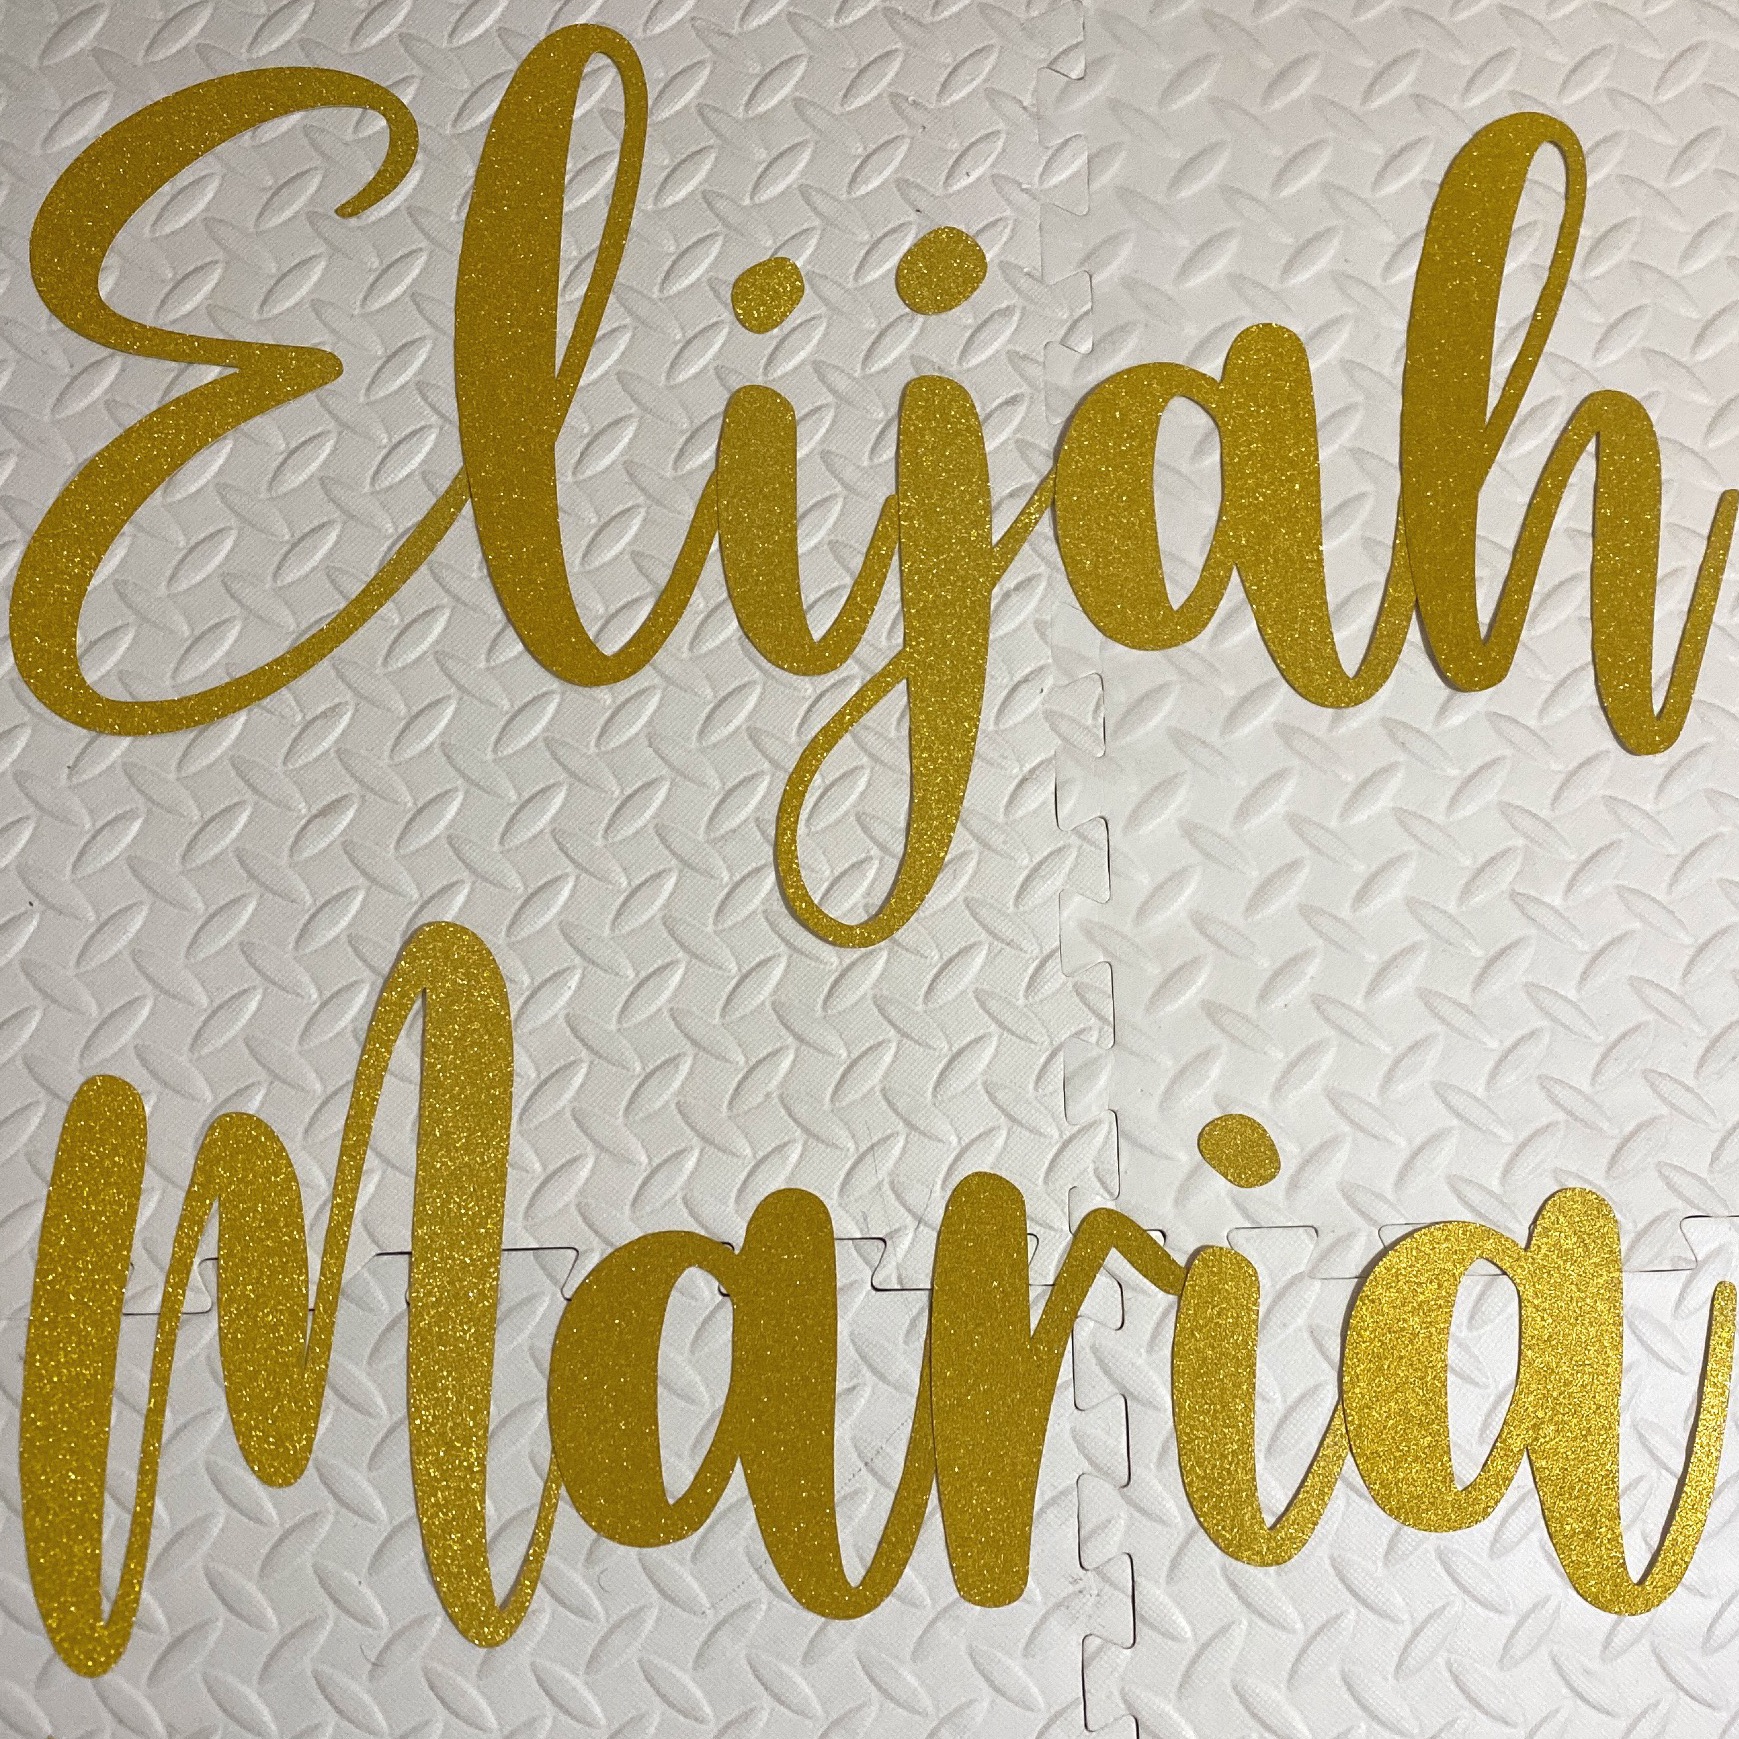 Personalized Letter Cut out for Backdrop Birthdays, Weddings, Parties,  Proposals, School art project, Lettering per letter, star decors, heart  decors, crown decors, Valentines surprise, monthsary gifts, intimate event,  minimalist design, room decors